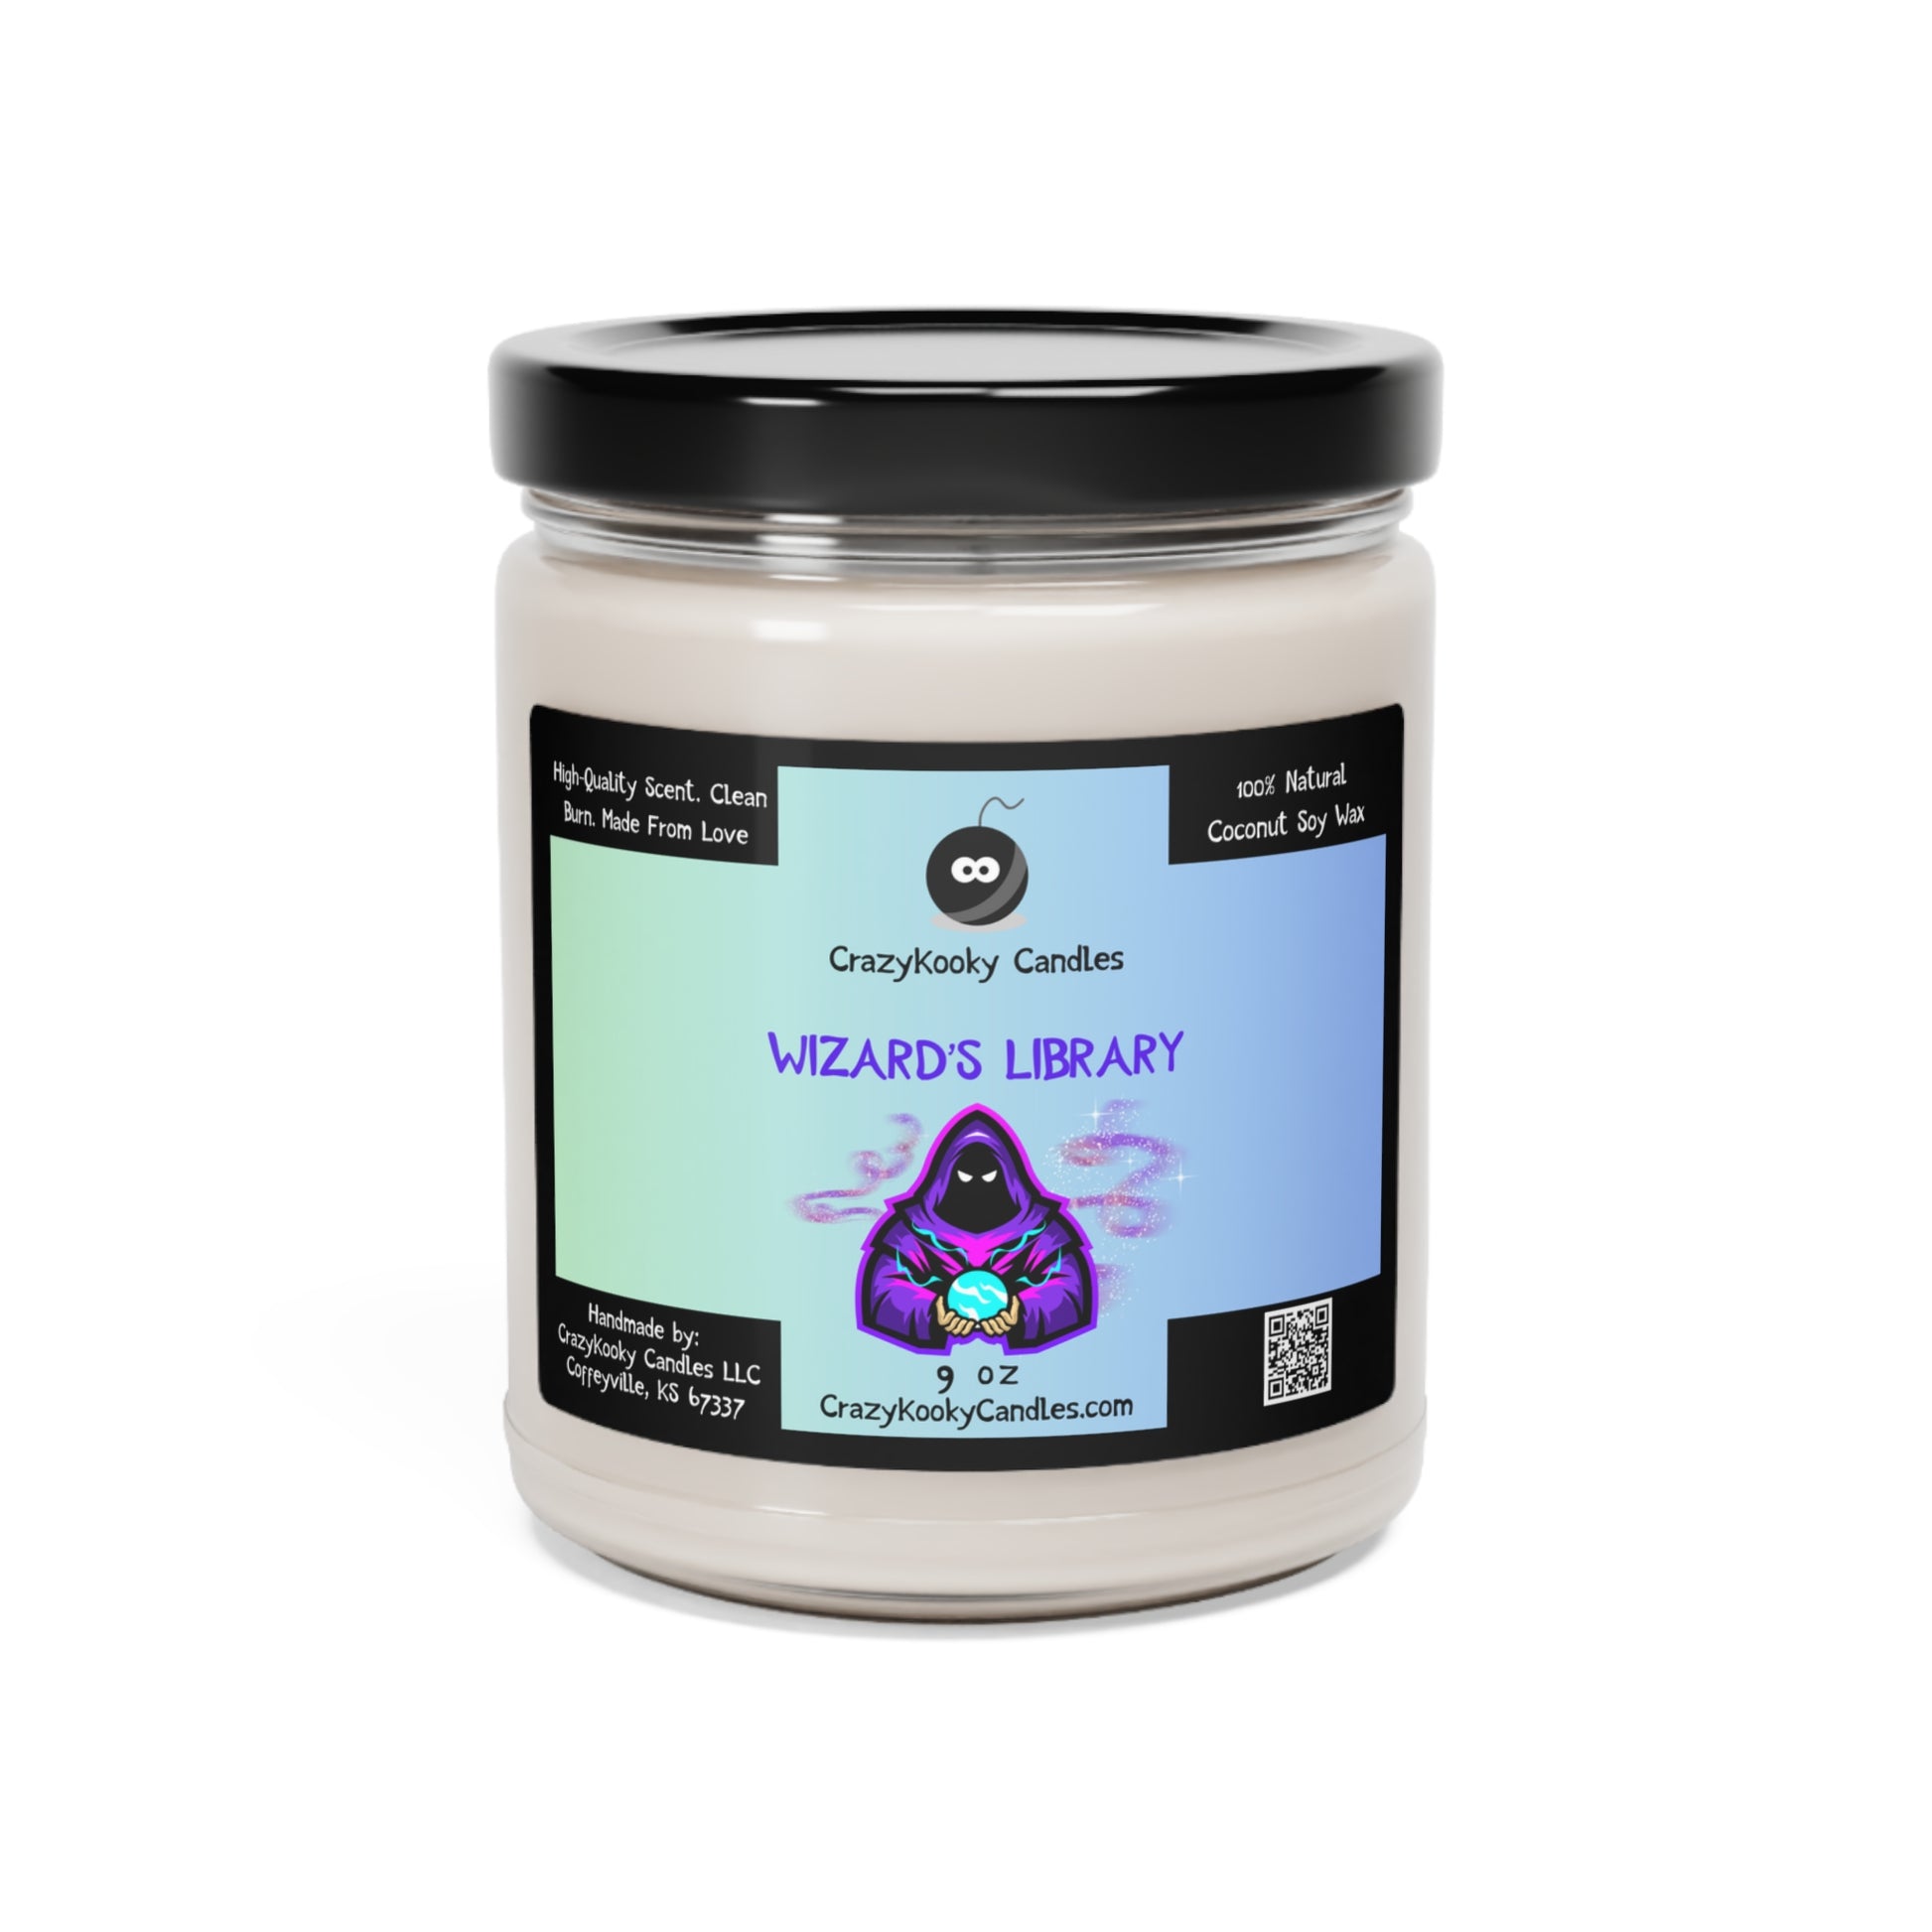 WIZARDS LIBRARY - Funny Candle, Scented Coconut Soy Candle, 9oz - CrazyKooky Candles LLC